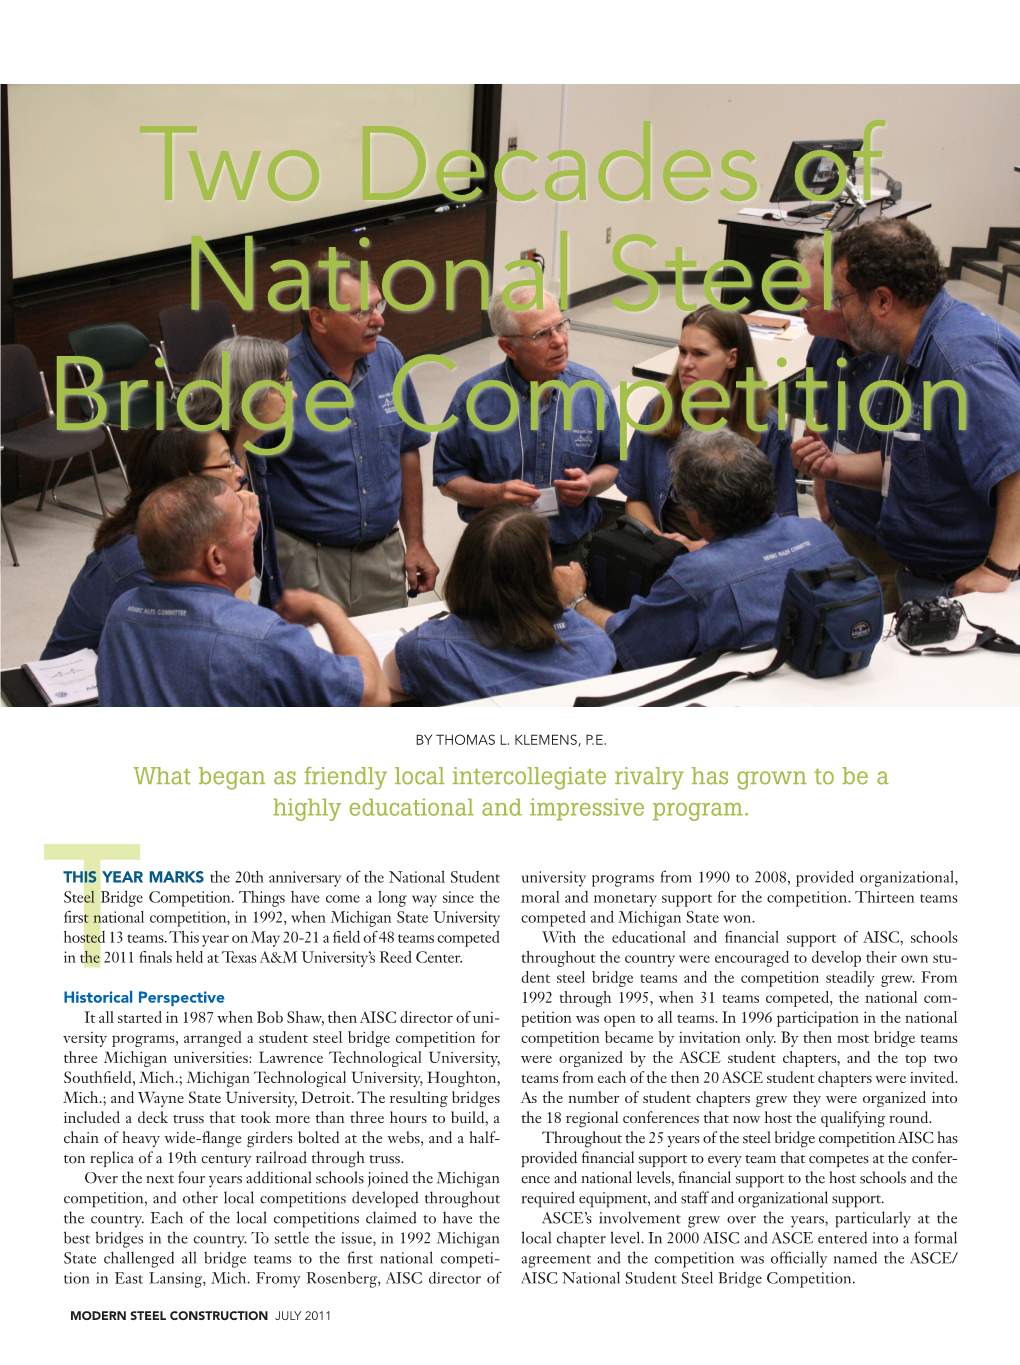 Two Decades of National Steel Bridge Competition